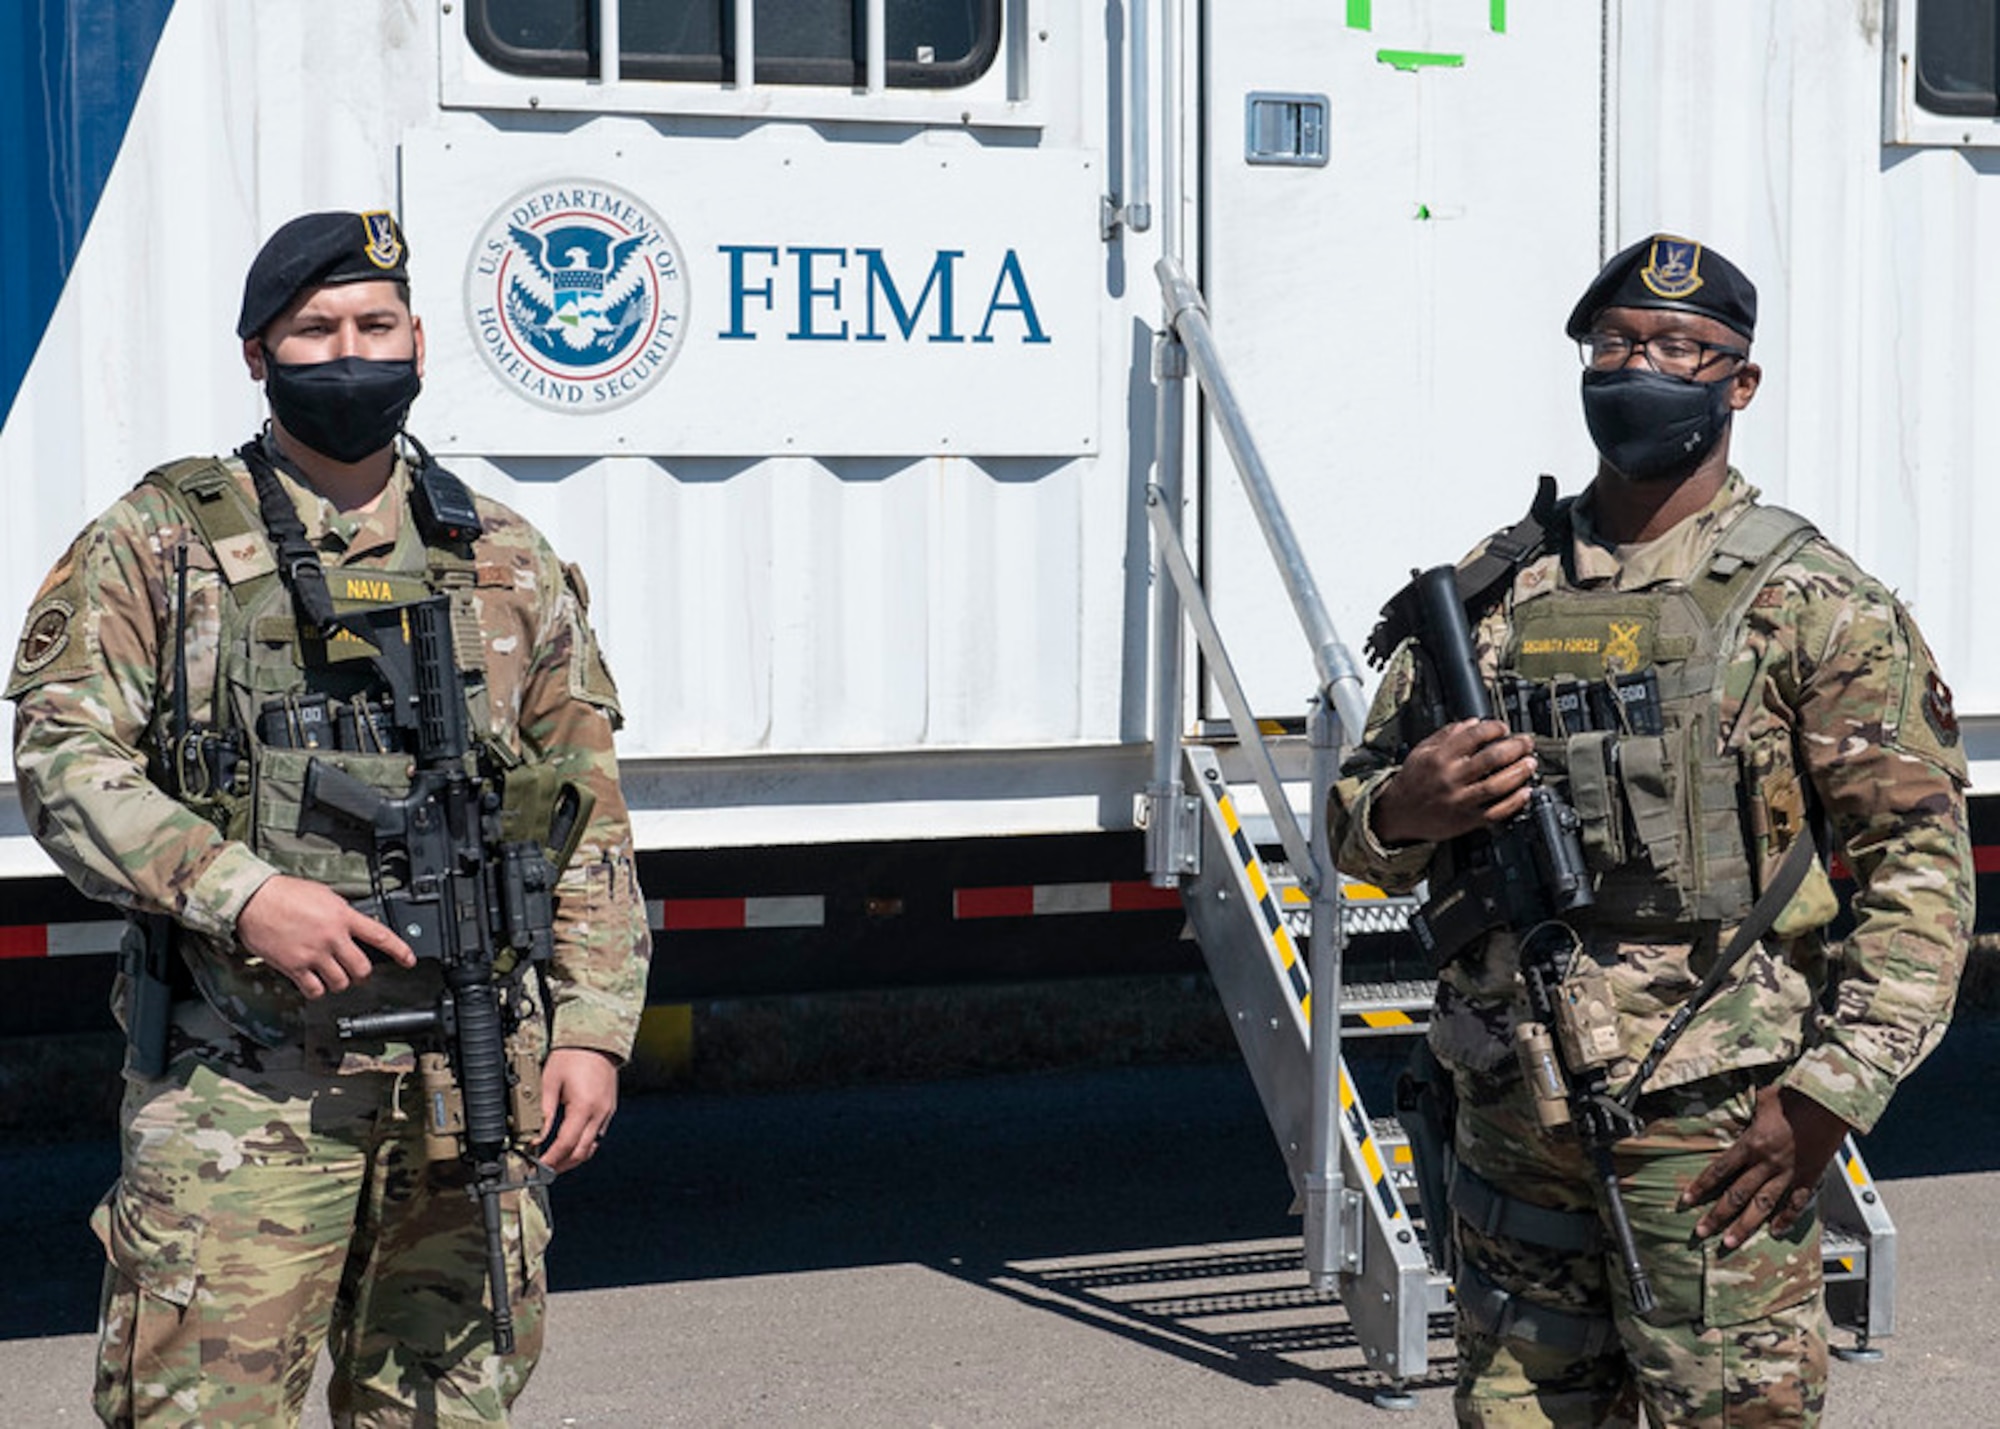 Staff Sgt. Saul Nava and Tech Sgt. Andre Bolden, 902d Security Forces Squadron provide security for the Federal Emergency Management Agency at Joint Base San Antonio-Randolph’s Seguin Auxiliary Airfield, Seguin, Texas, Feb. 20, 2021.